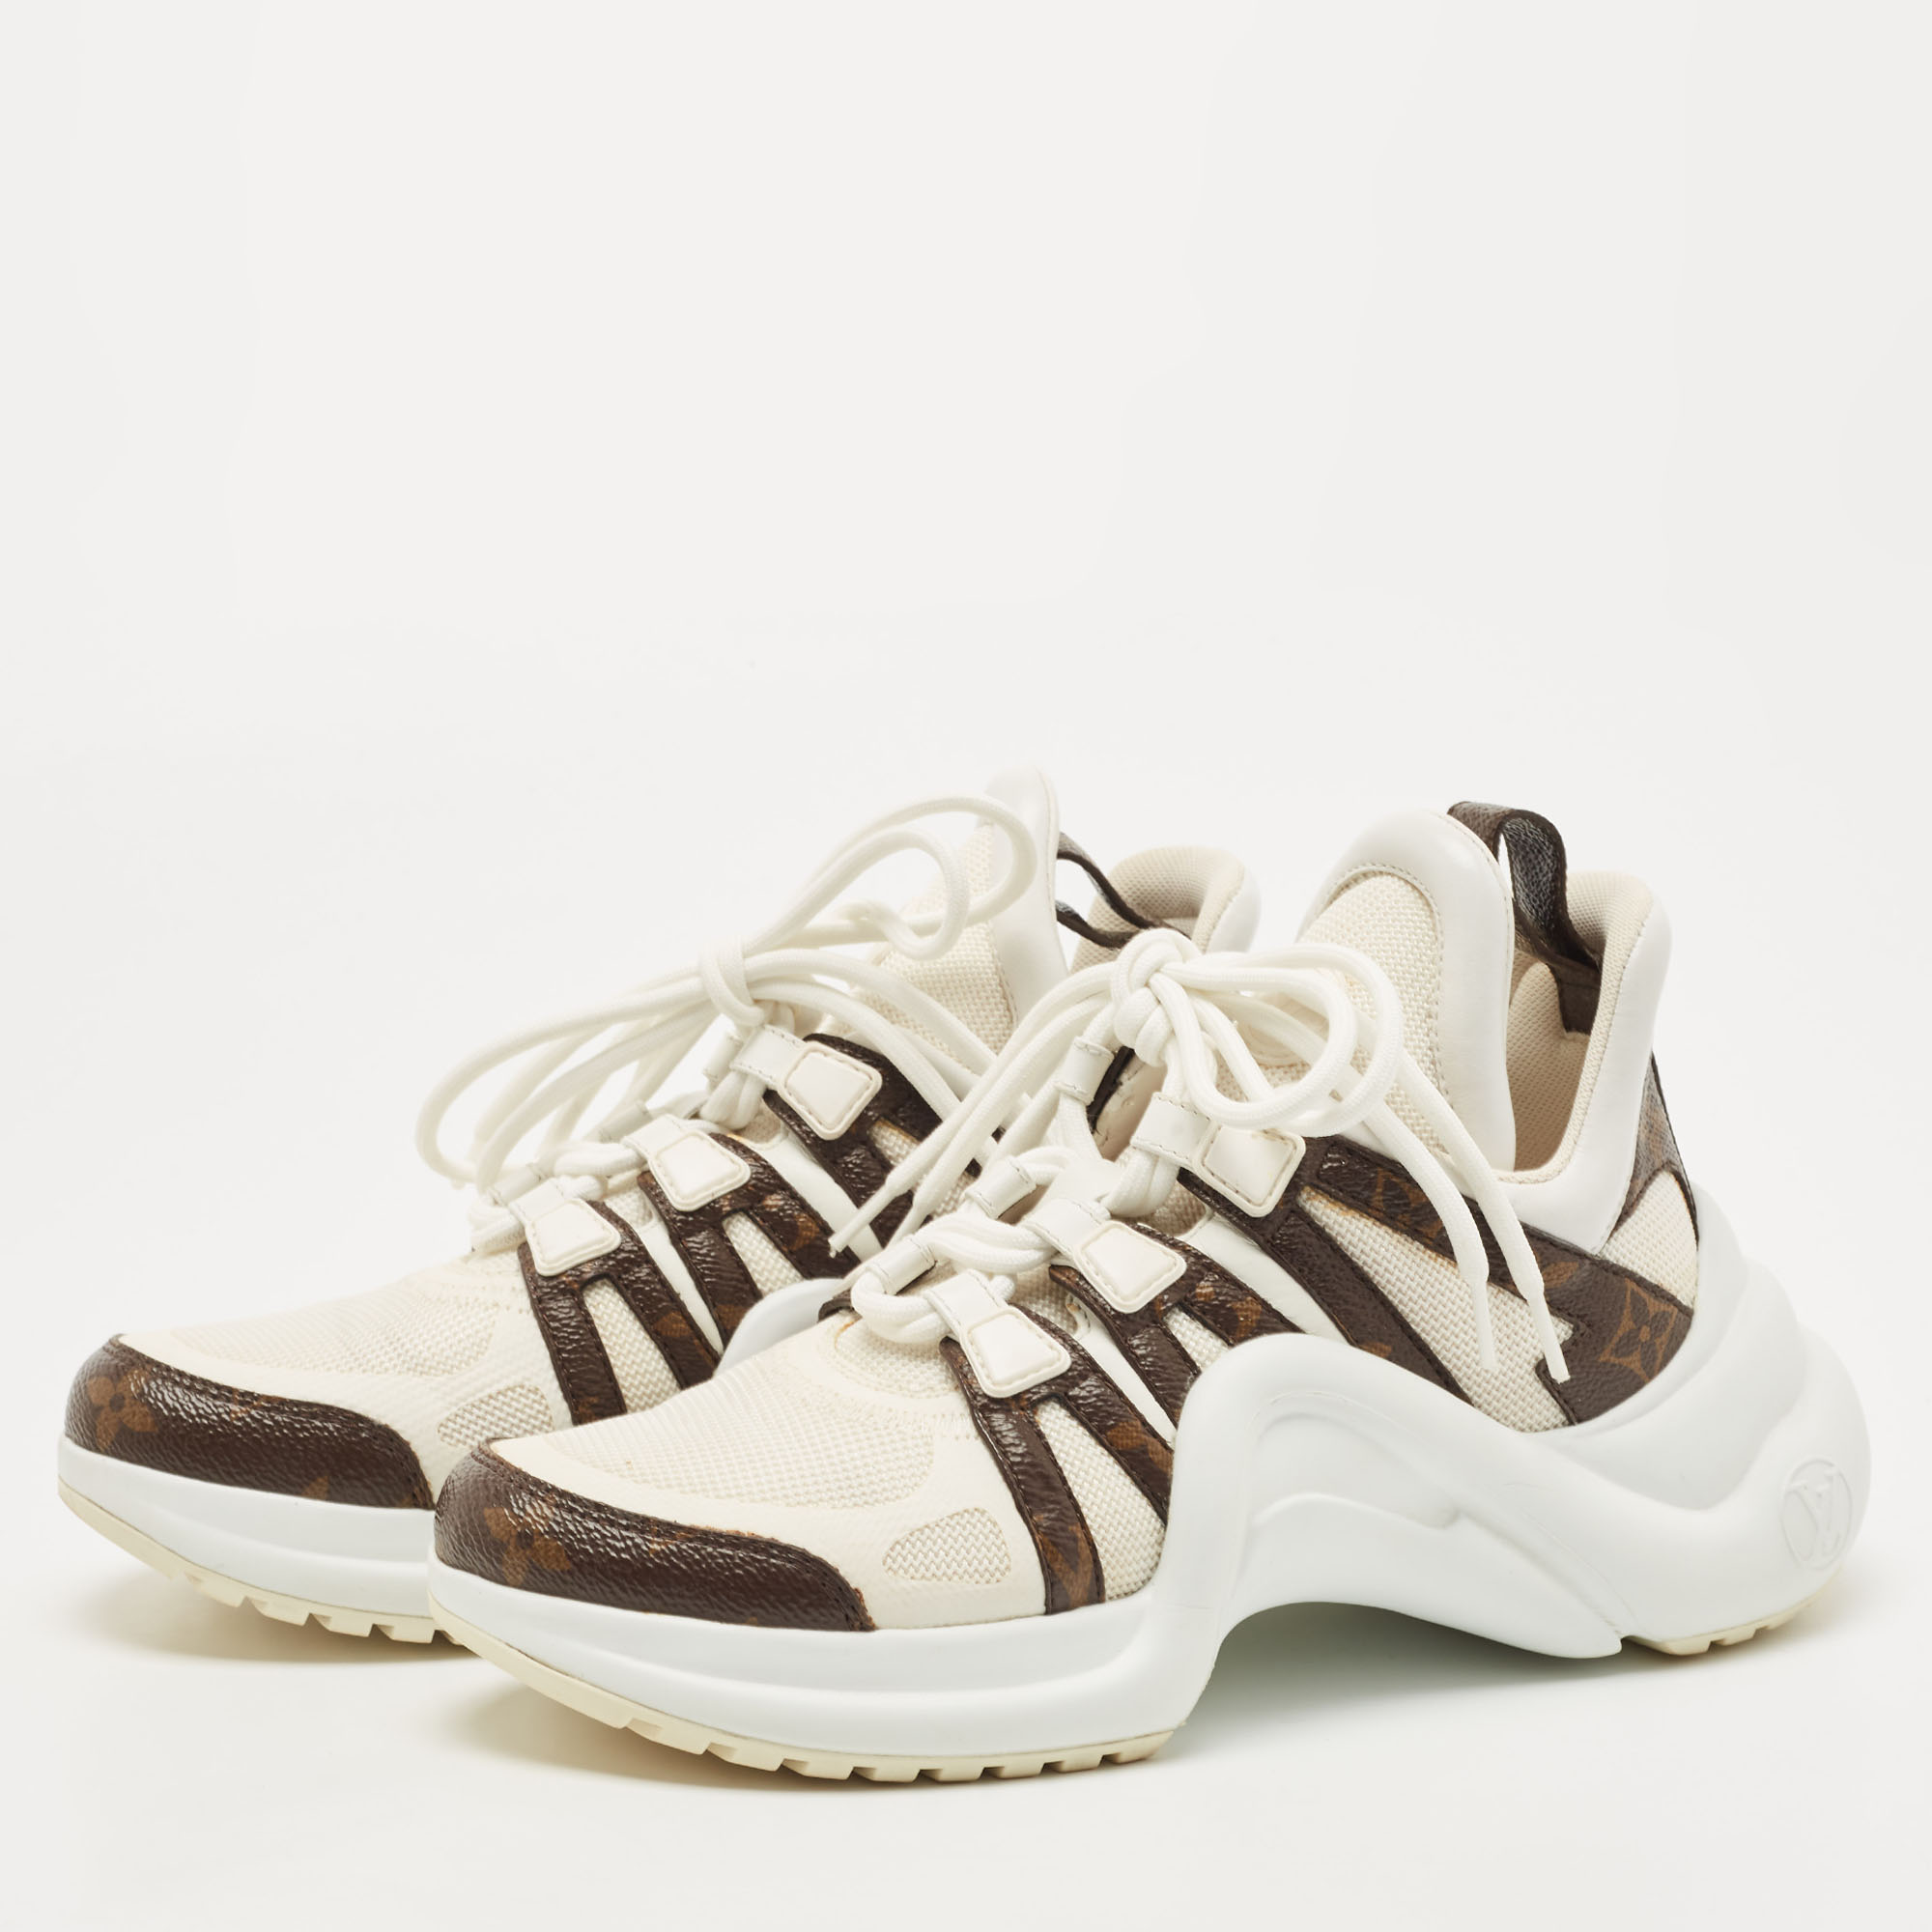 

Louis Vuitton White/Monogram Canvas and Leather Archlight Sneakers Size, Brown